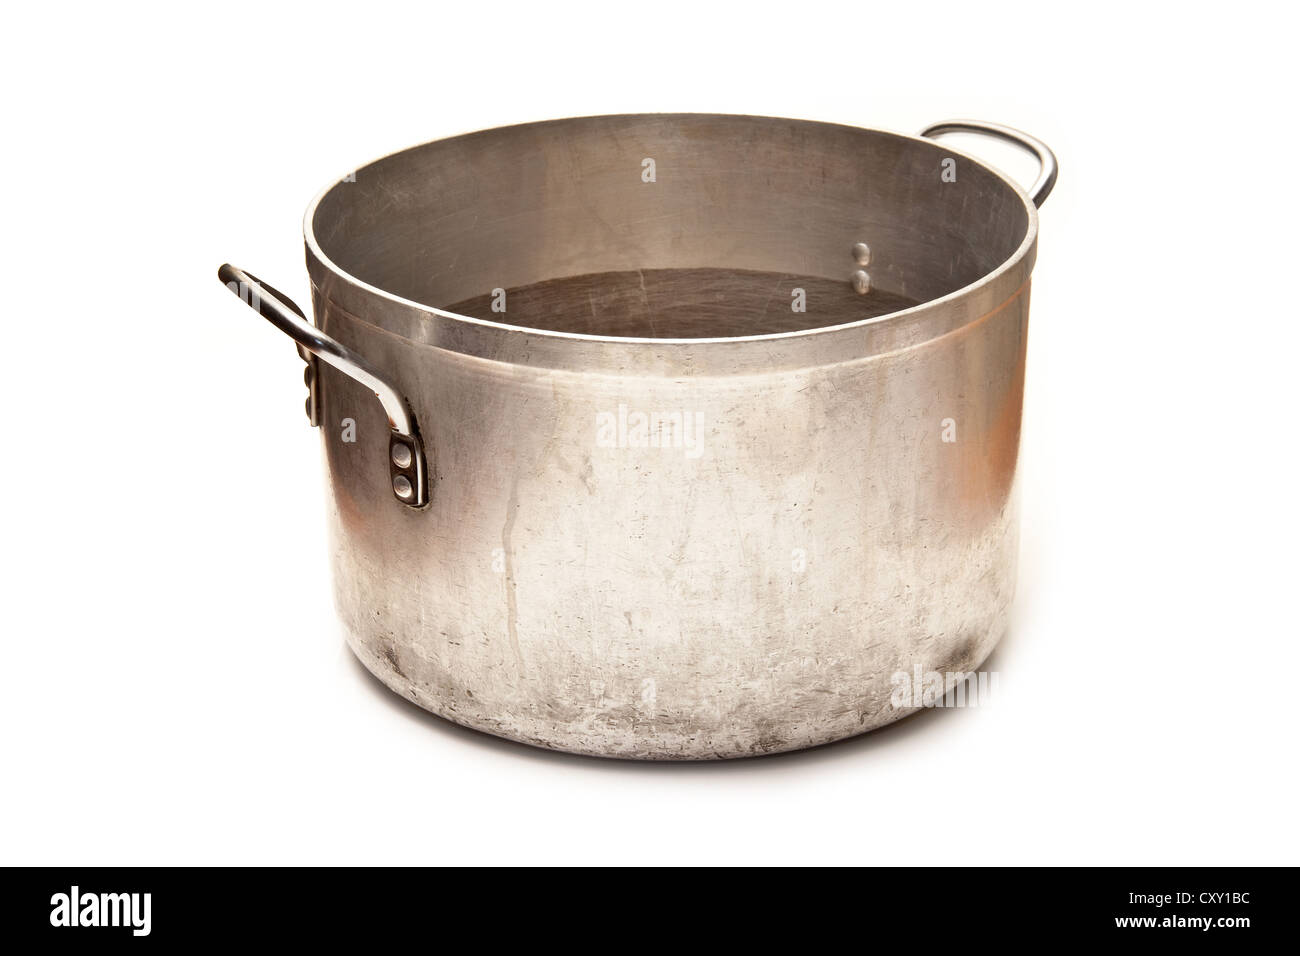 https://c8.alamy.com/comp/CXY1BC/large-metal-saucepan-cooking-pot-isolated-on-a-white-studio-background-CXY1BC.jpg